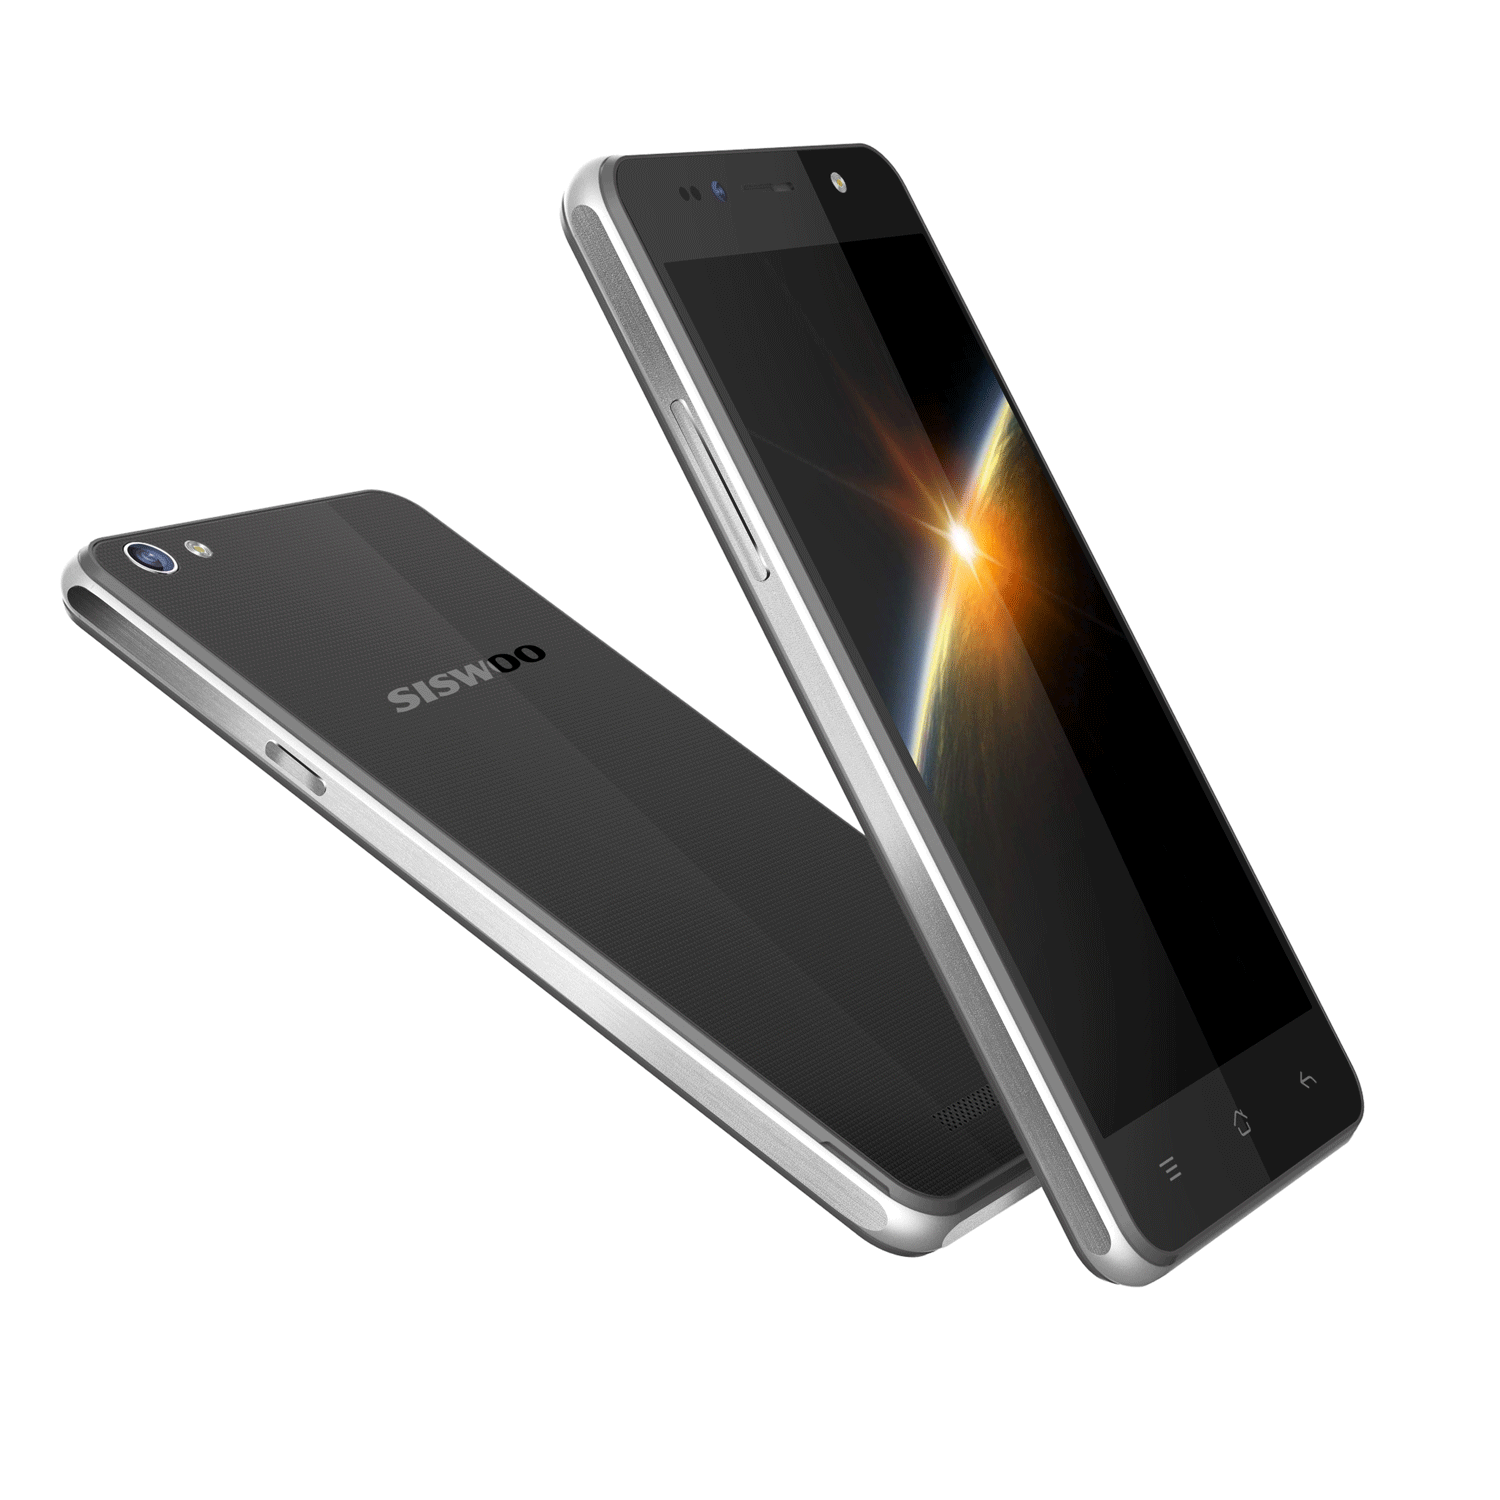 SISWOO Longbow C50 Smartphone Android 5.1 4G 64bit MTK6735 1.5GHz HD 5.0 Inch- Black